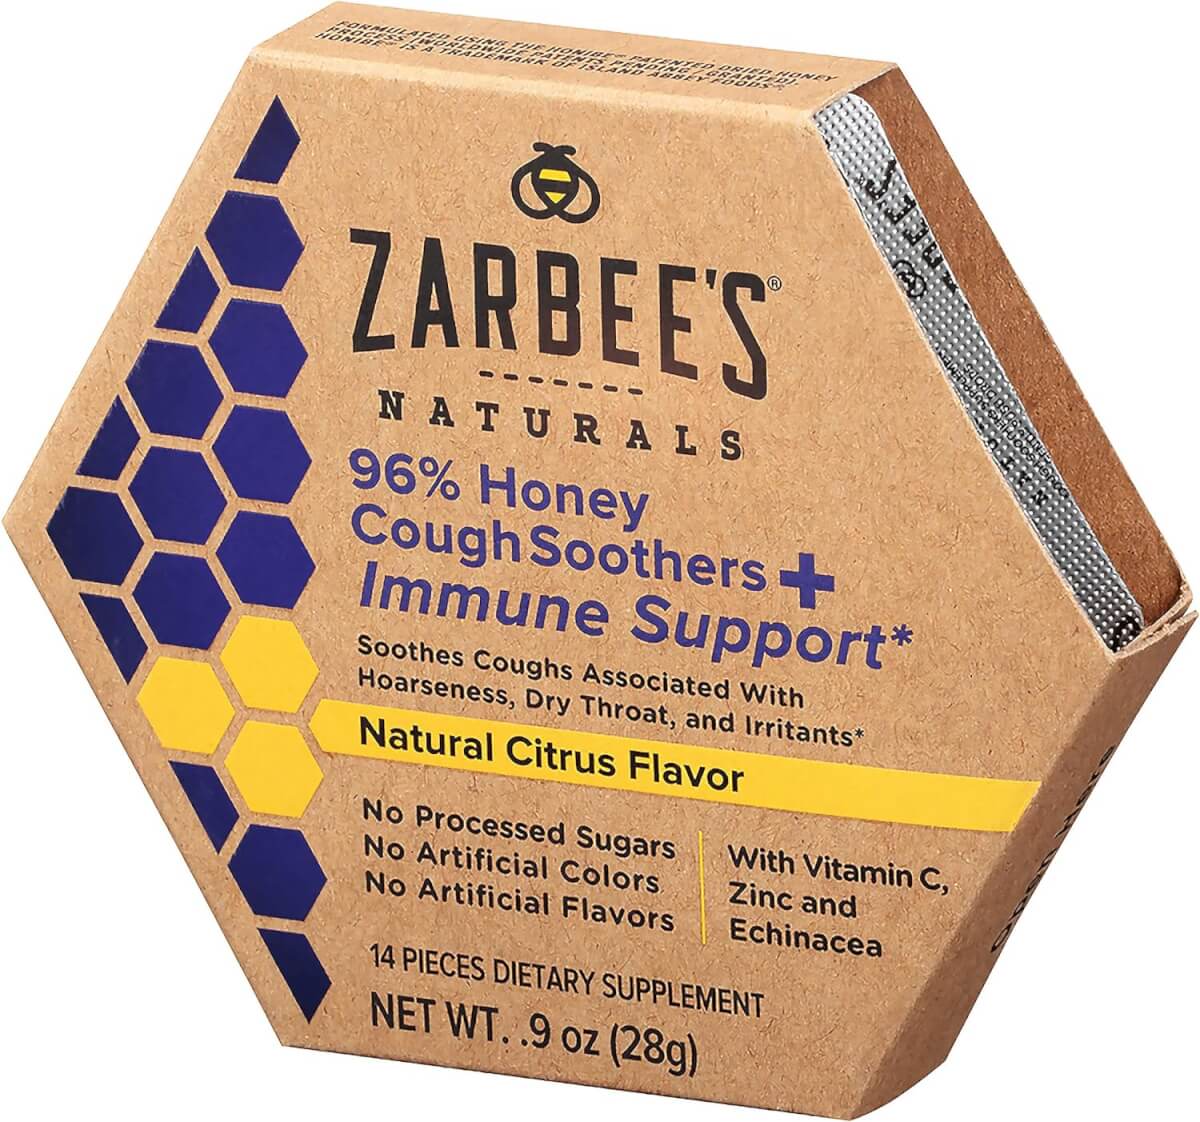 Zarbee’s Naturals 96% Honey Cough Soothers + Immune Support